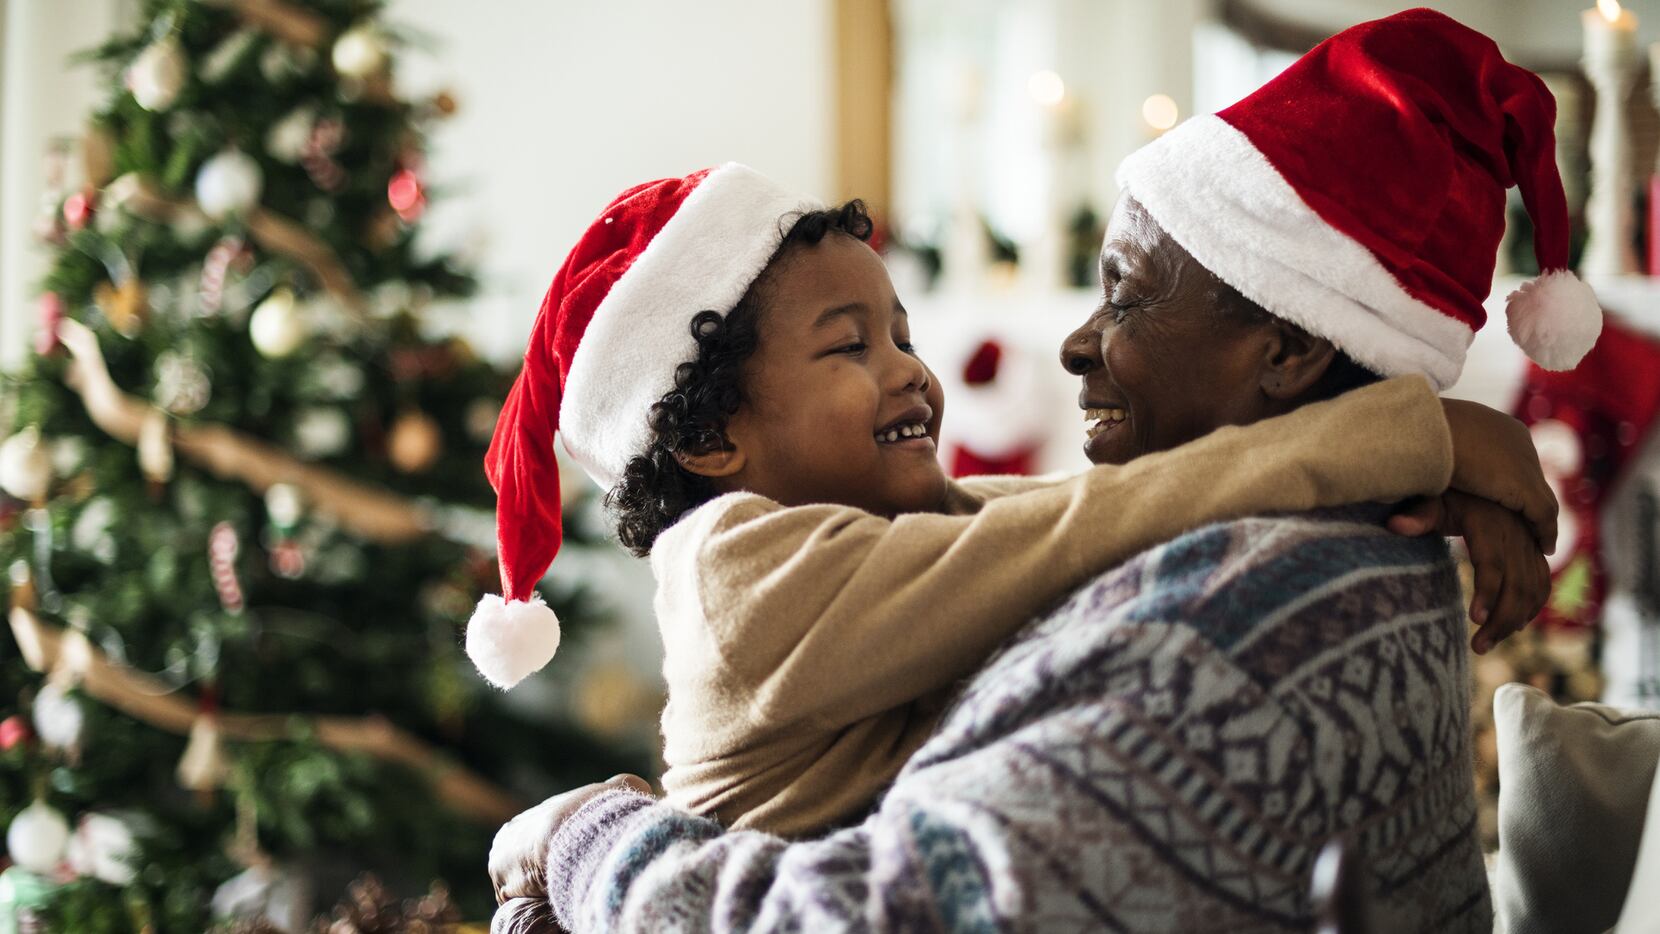 A parent and child hug while wearing Santa hats with a Christmas tree in the background.